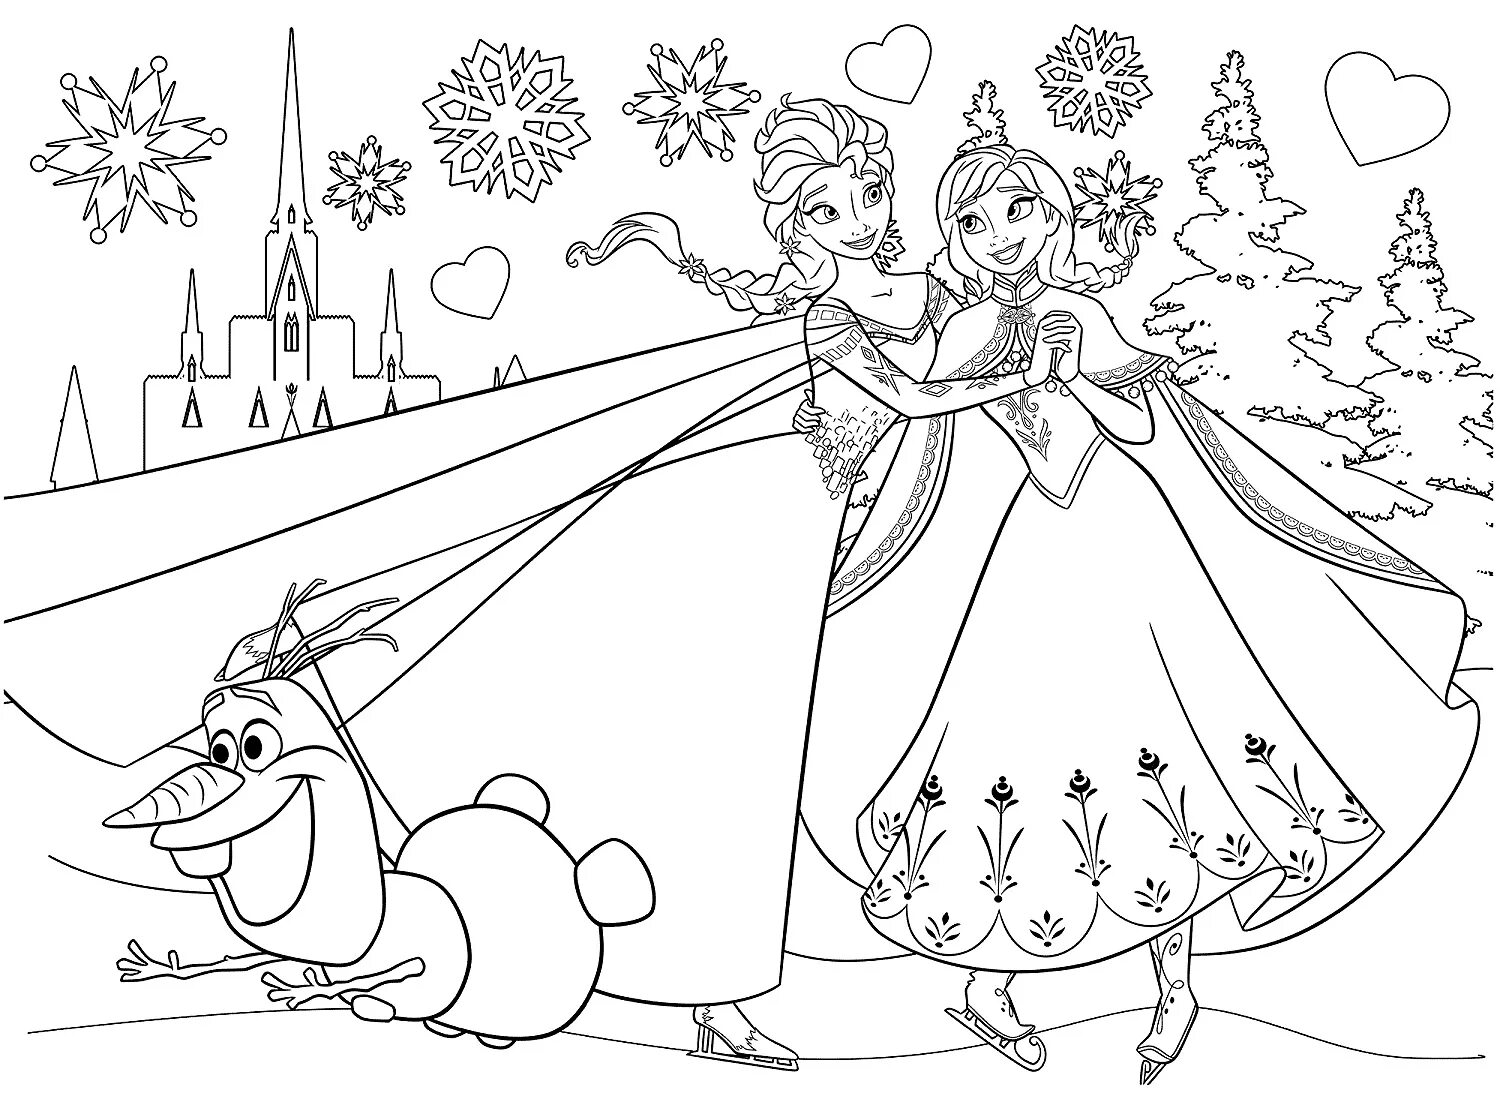 Frozen #2 coloring page